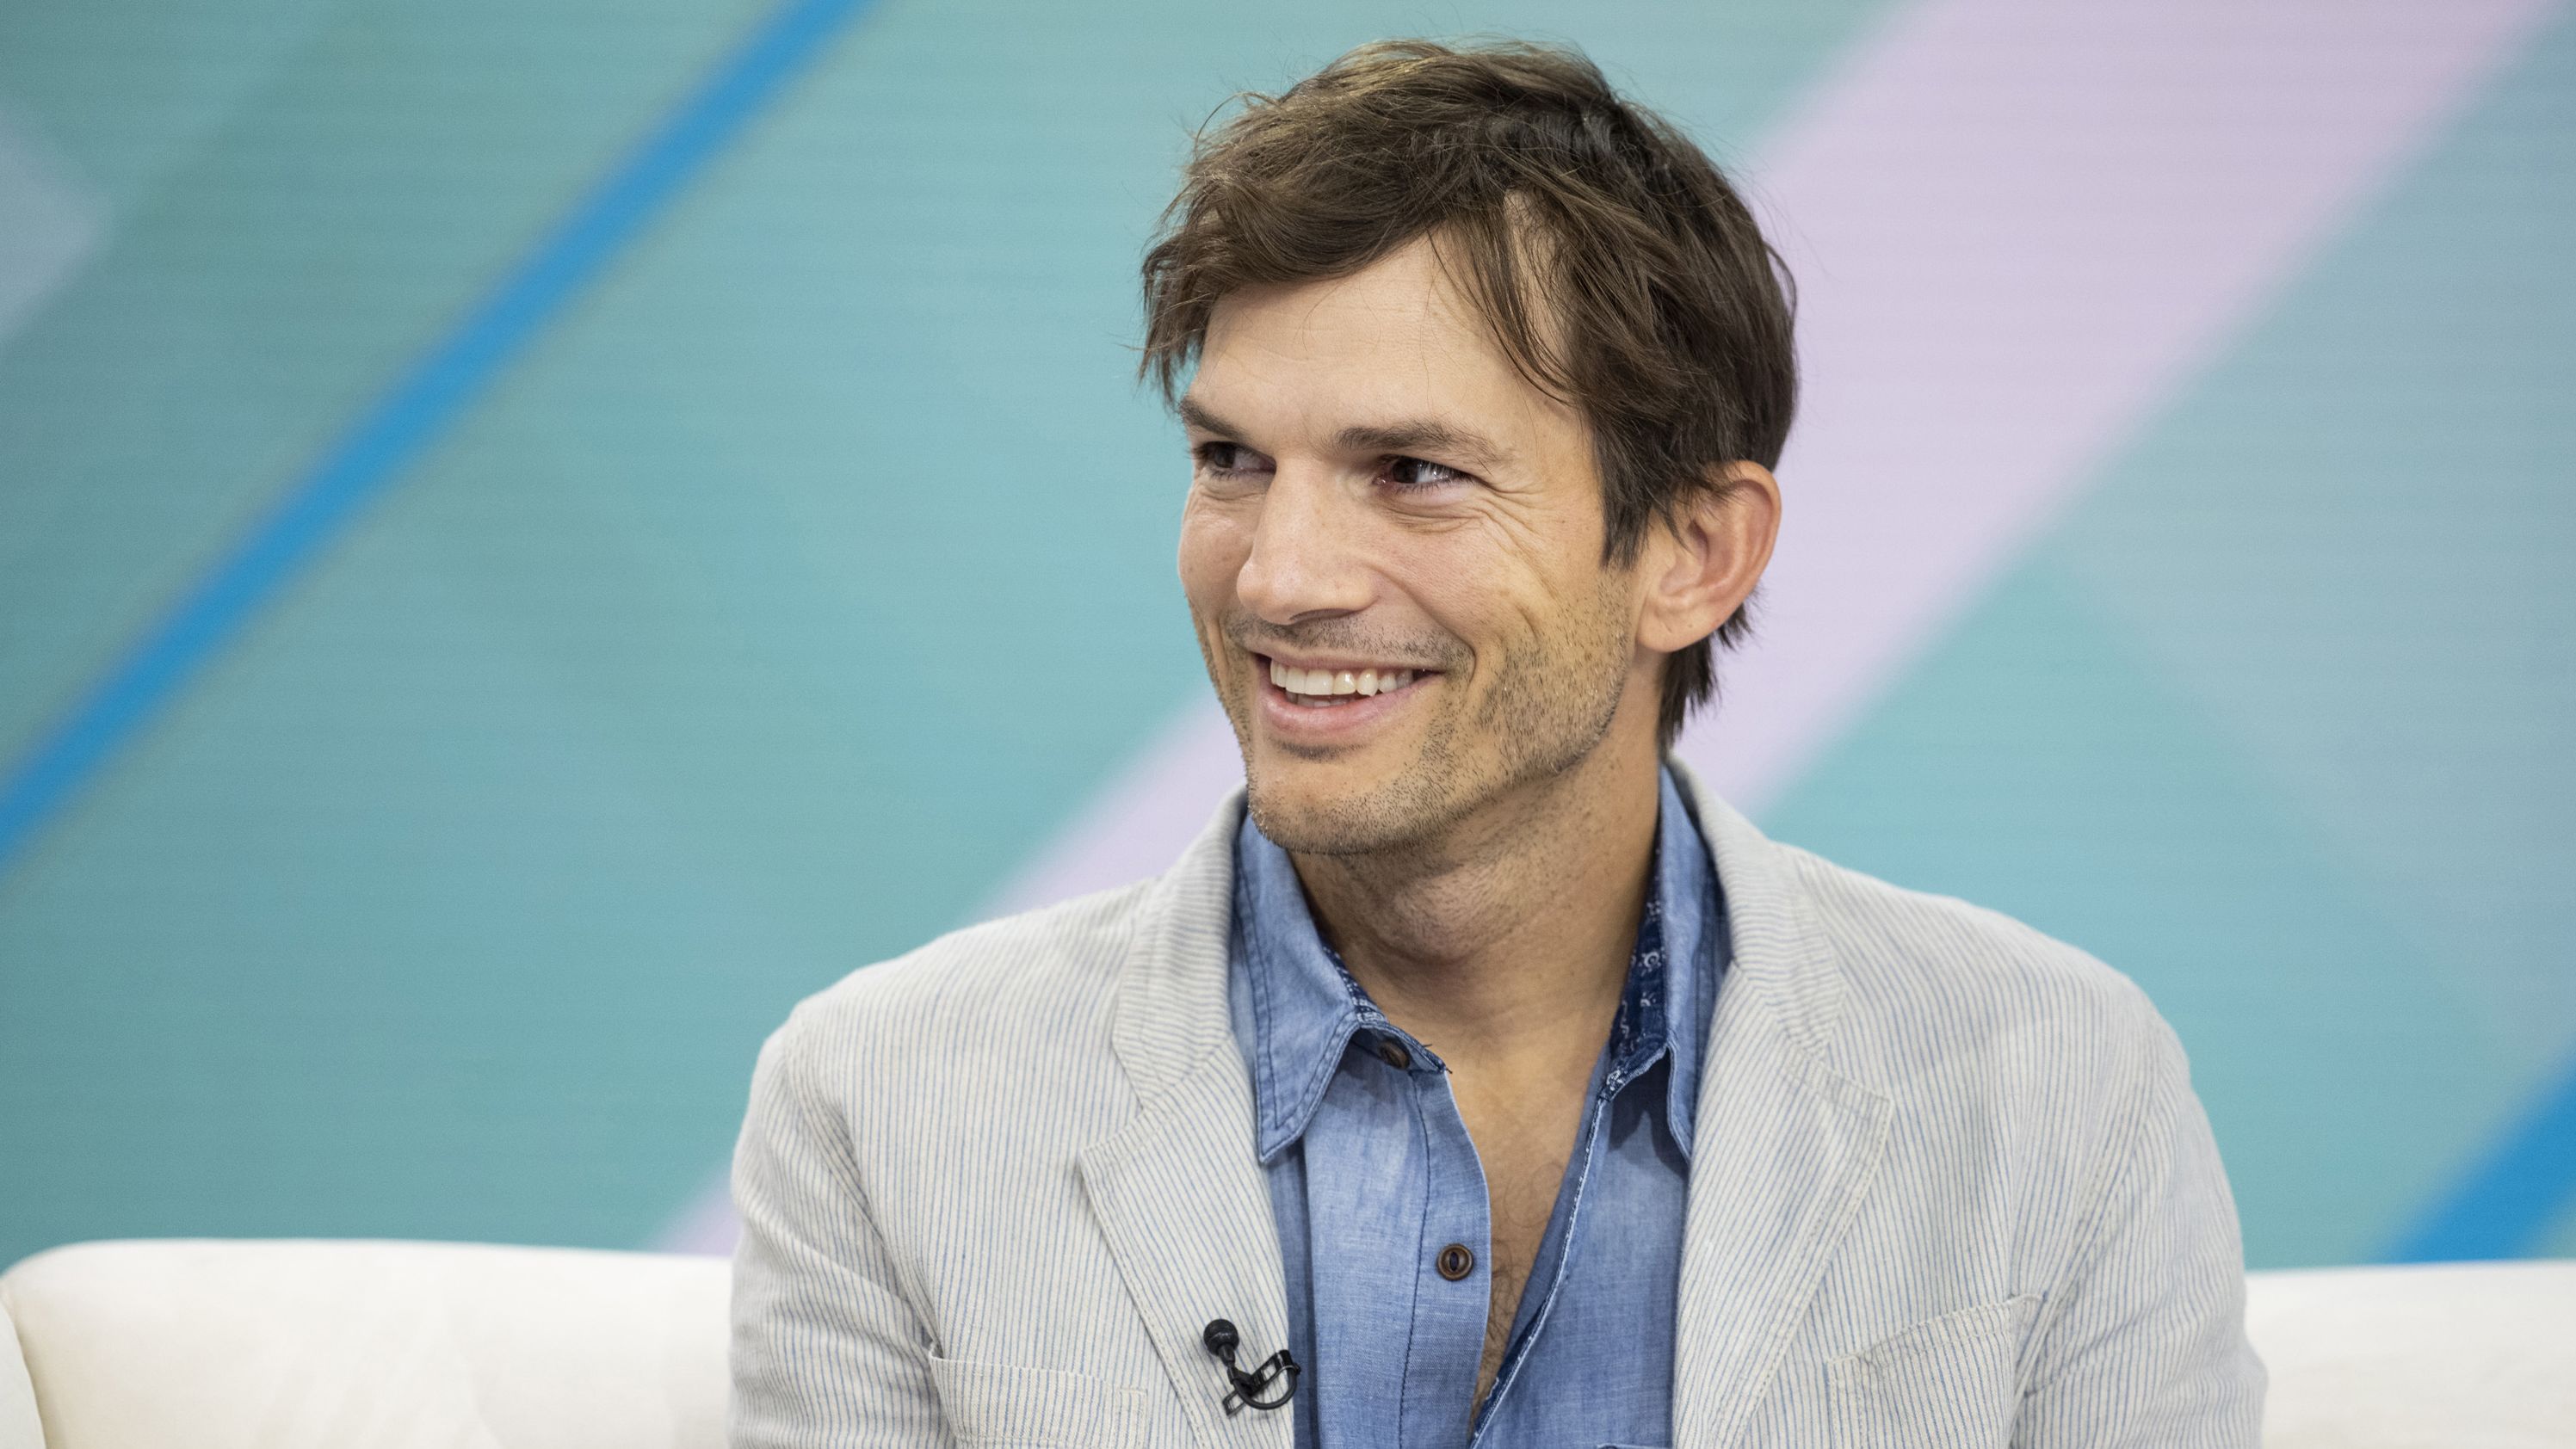 Ashton Kutcher is running the New York City Marathon to raise money for Thorn, the nonprofit he co-founded in 2012.